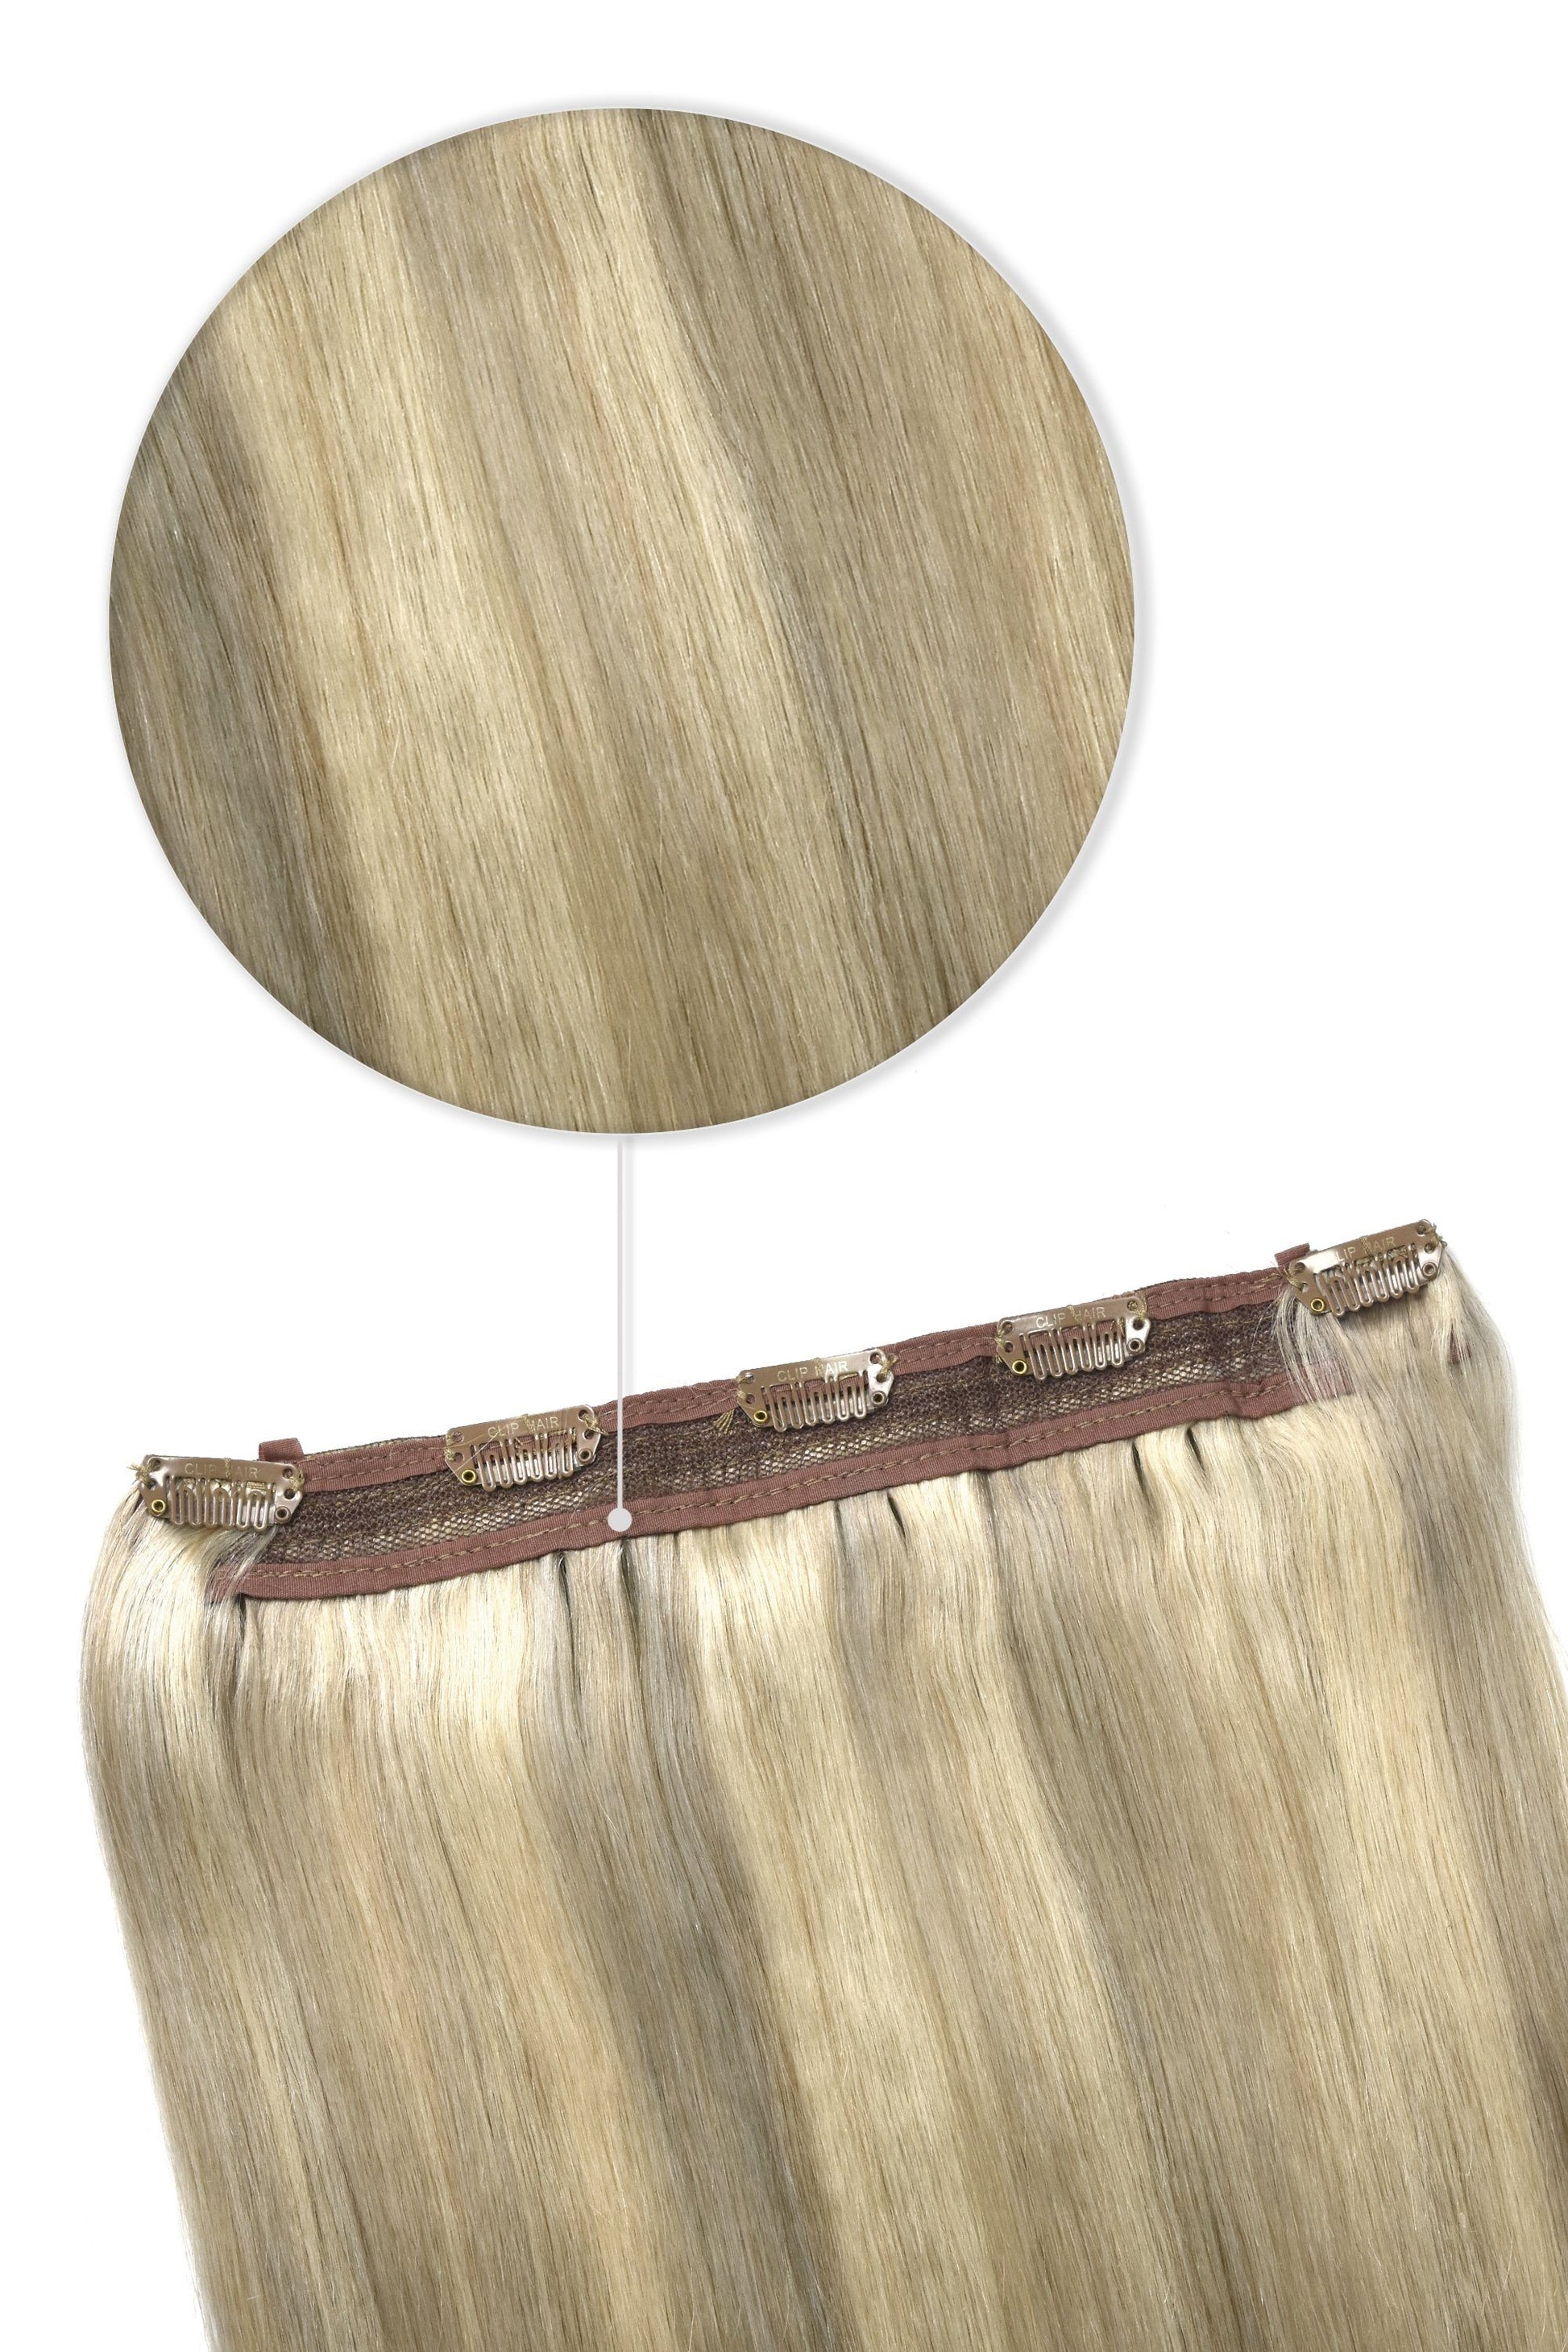 Quad Wefted Remy Clip in Human Hair Extensions - BlondeMe (#60/SS) Quad Weft Pieces cliphair 